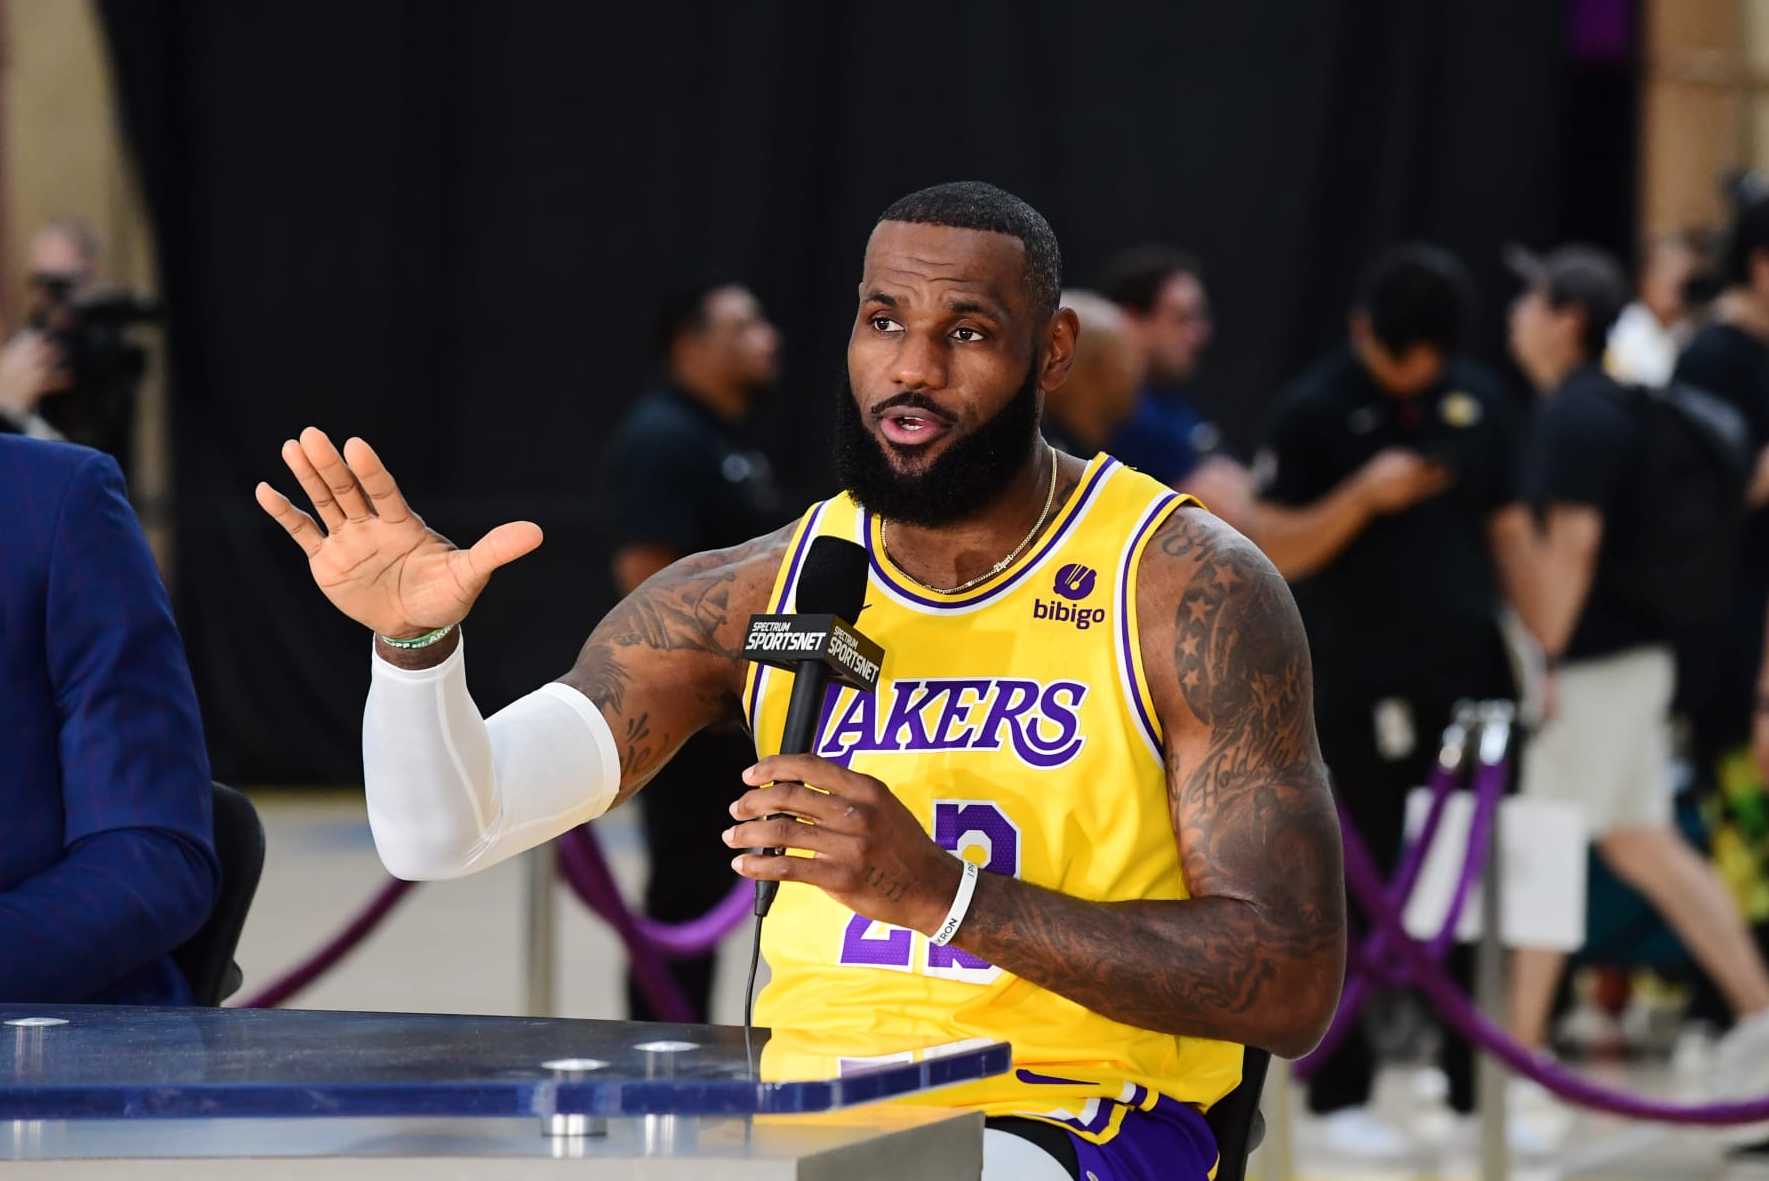 The Lakers' new uniforms have a 'Showtime' throwback vibe, with